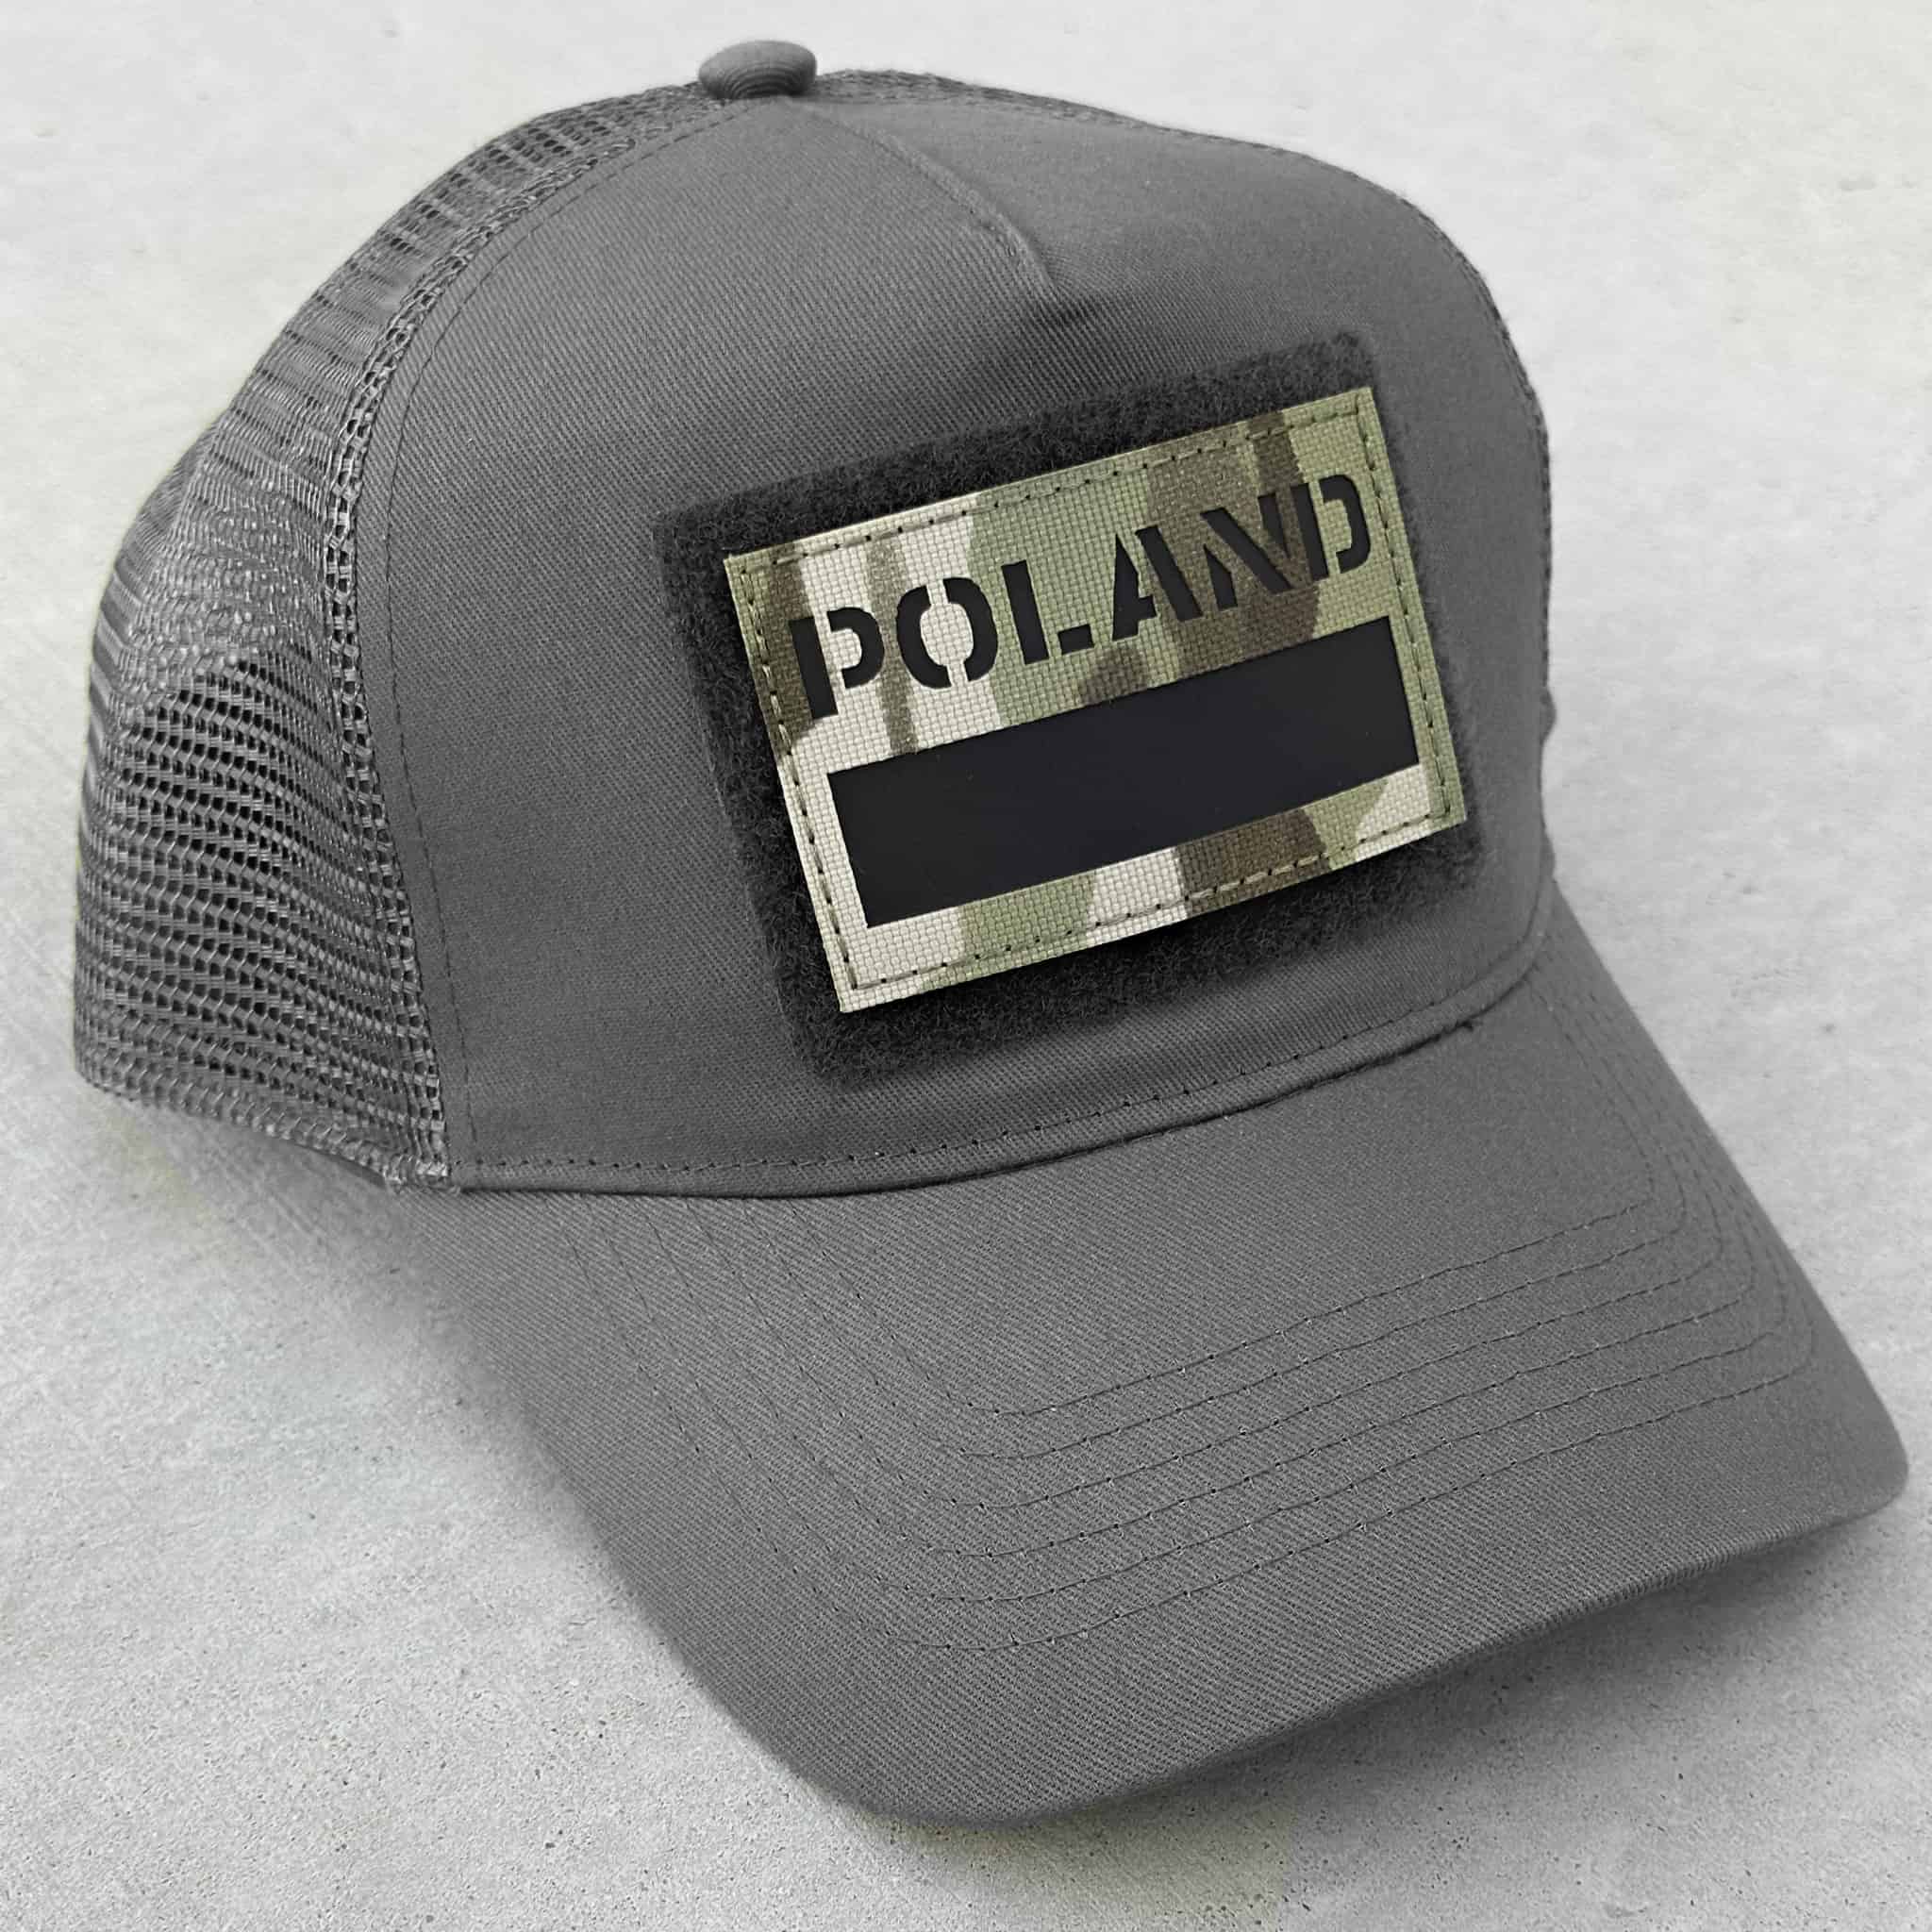 The trucker snapback cap in grey with Poland flag patch attached